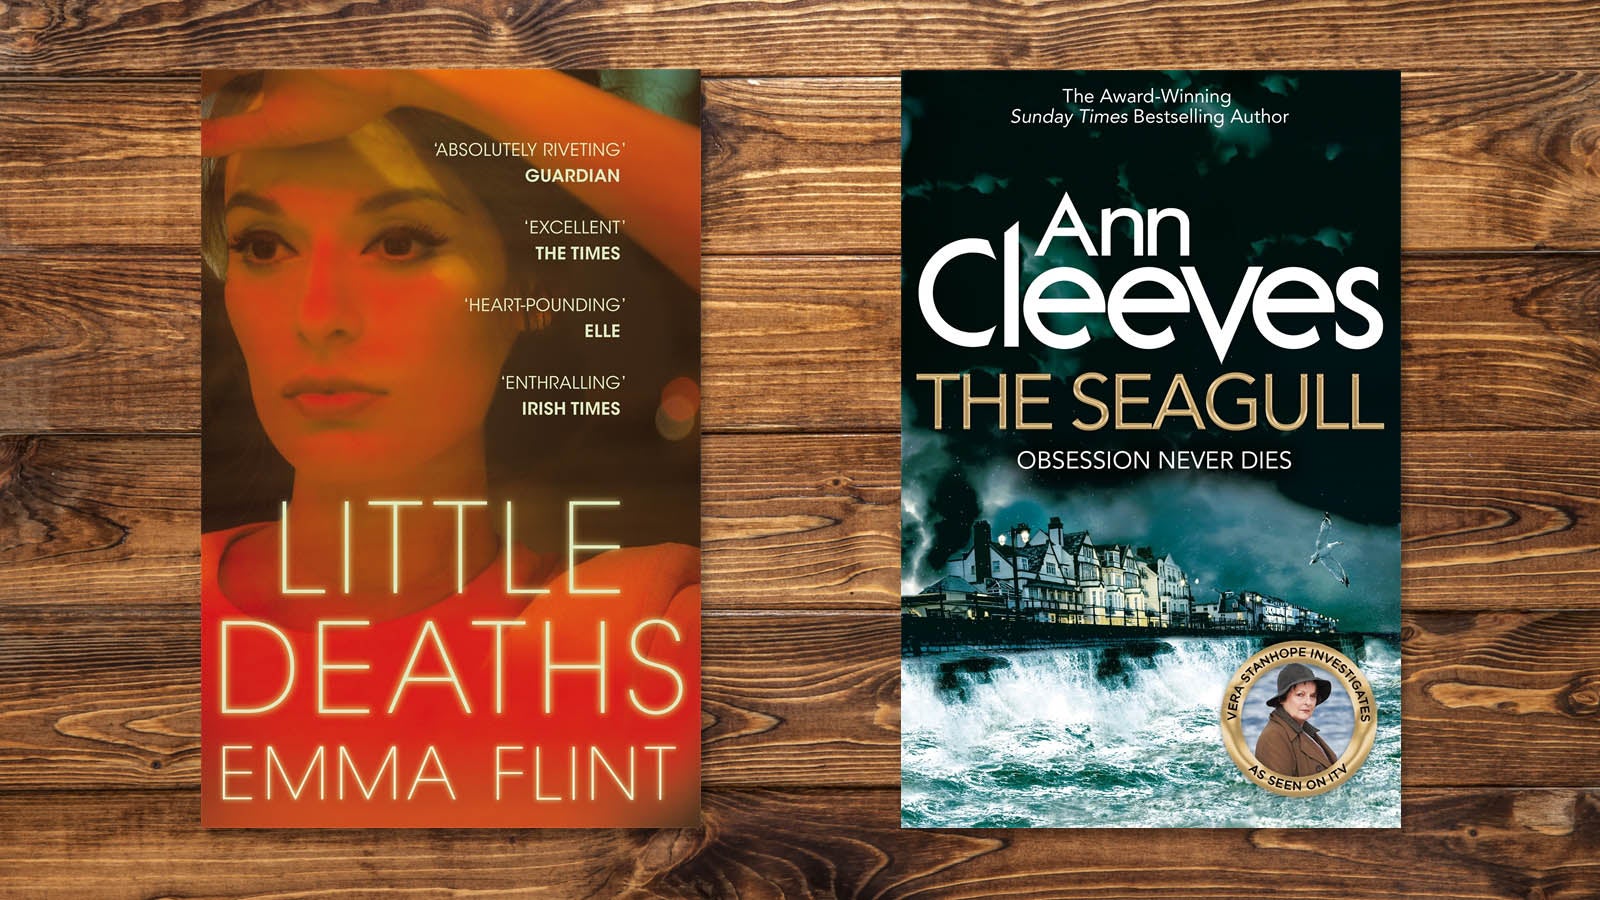 Little Deaths by Emily Flint Book jacket and The Seagull by Ann Cleeves